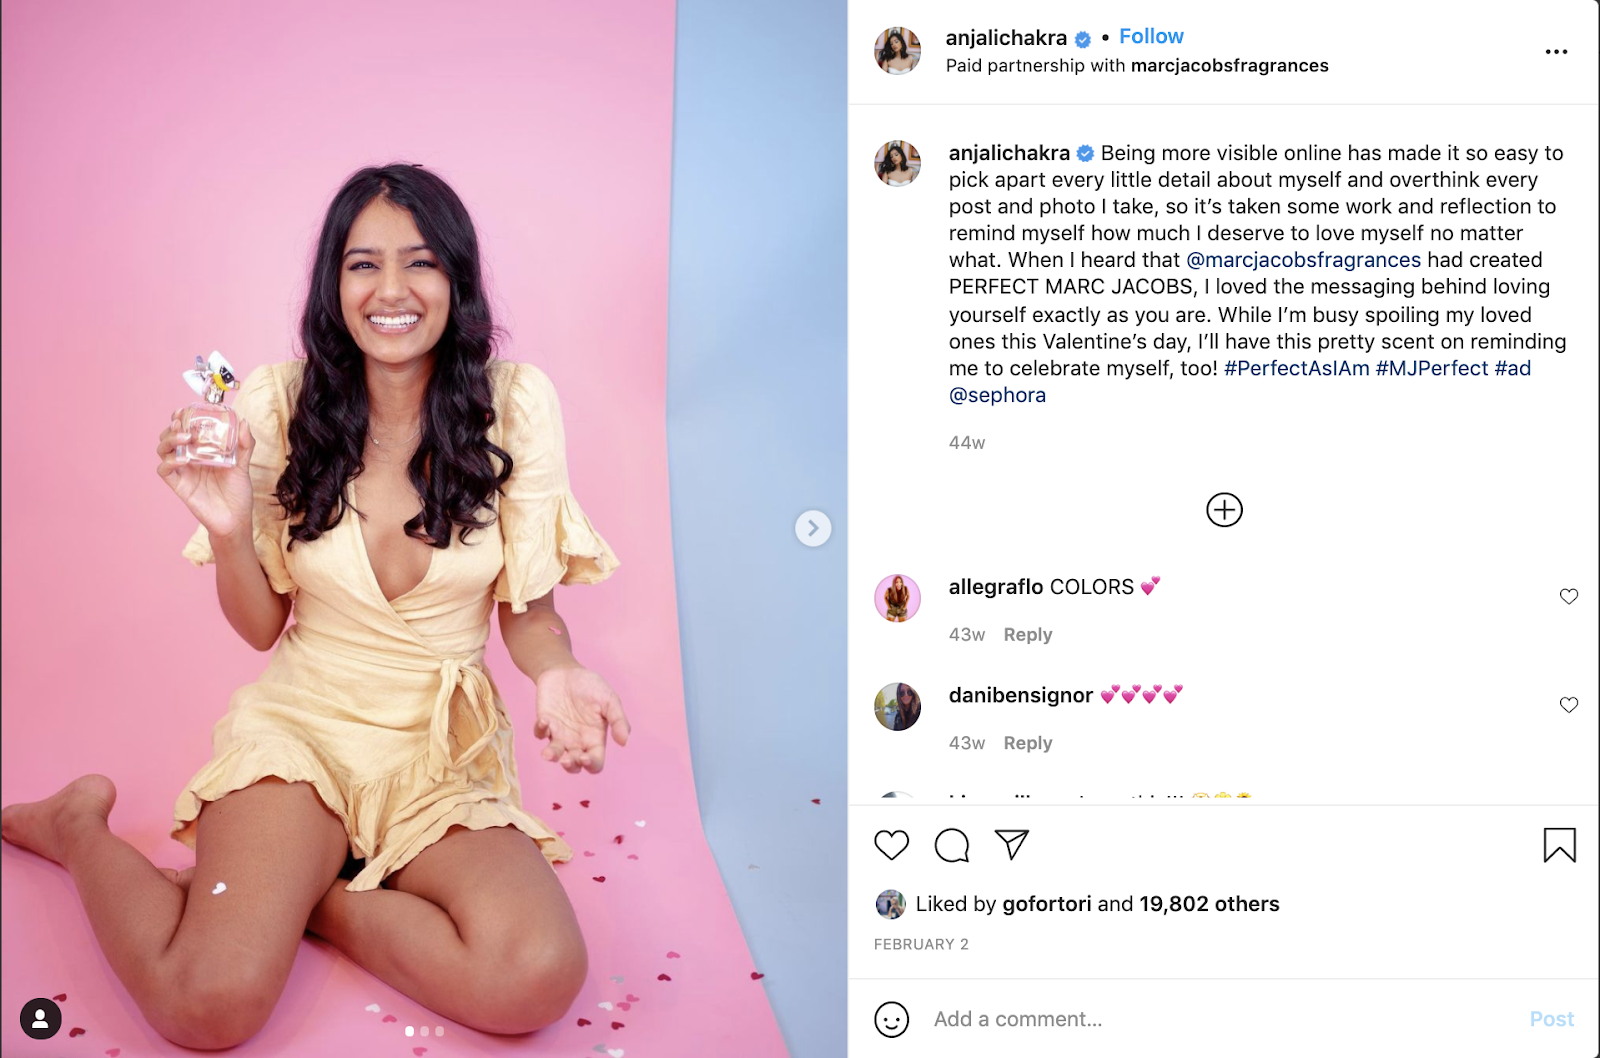 Screenshot of Instagram post in which influencer is posing with MARC JACOBS perfume called PERFECT in front of a pink background with heart-shaped confetti. The Valentine's Day influencer marketing post includes a caption about the brand